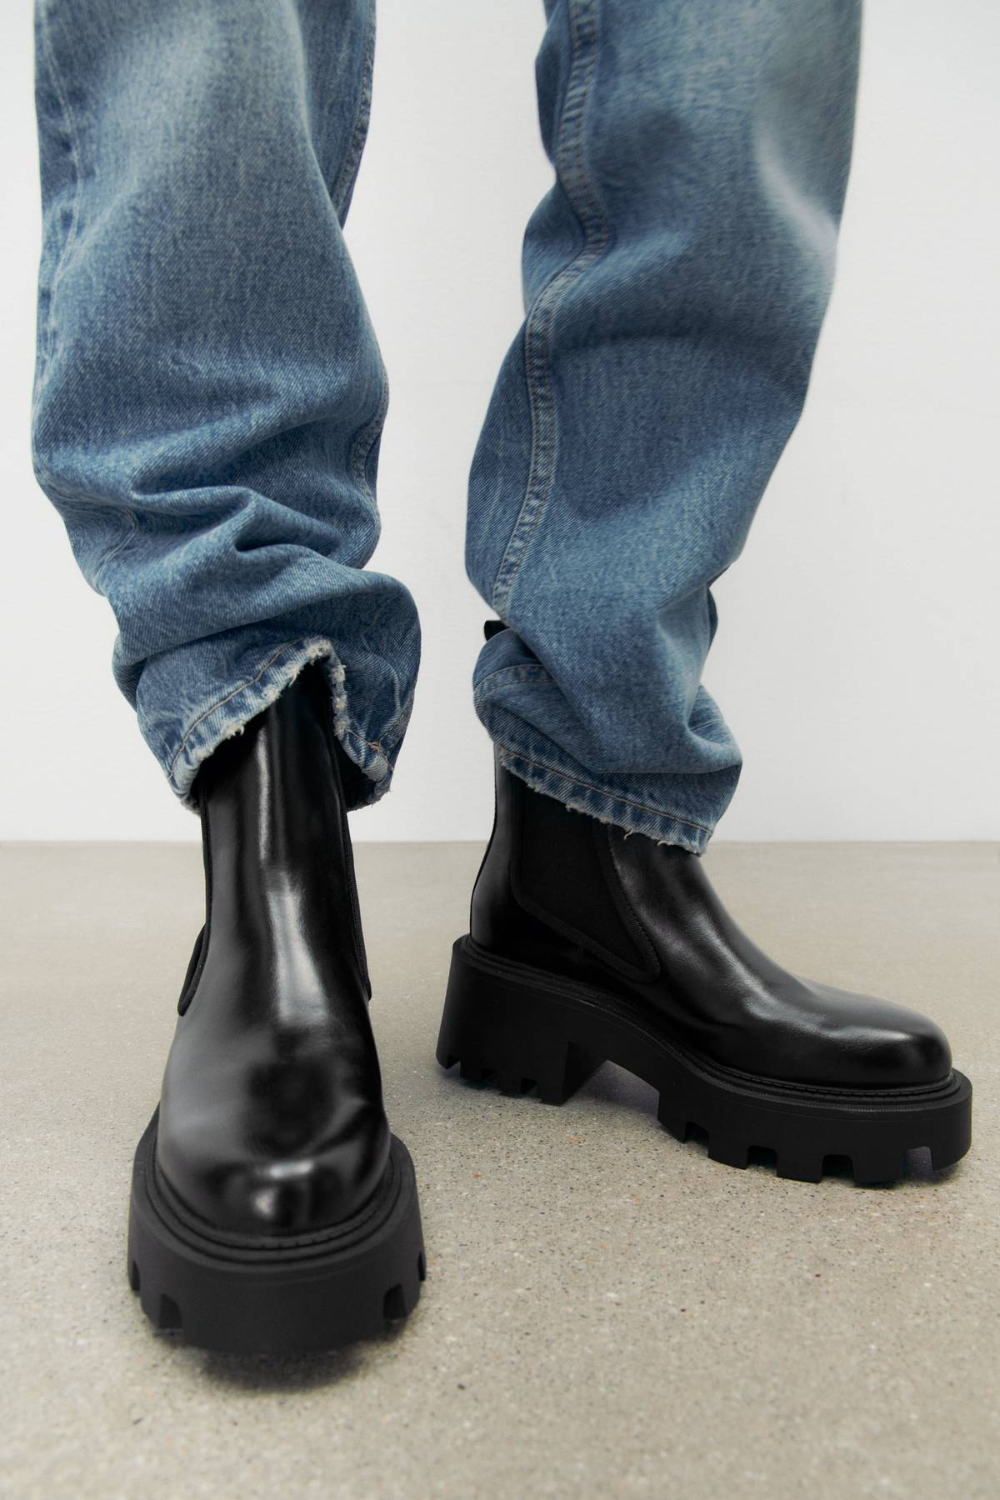 Attractive and fashionable mens black
boots